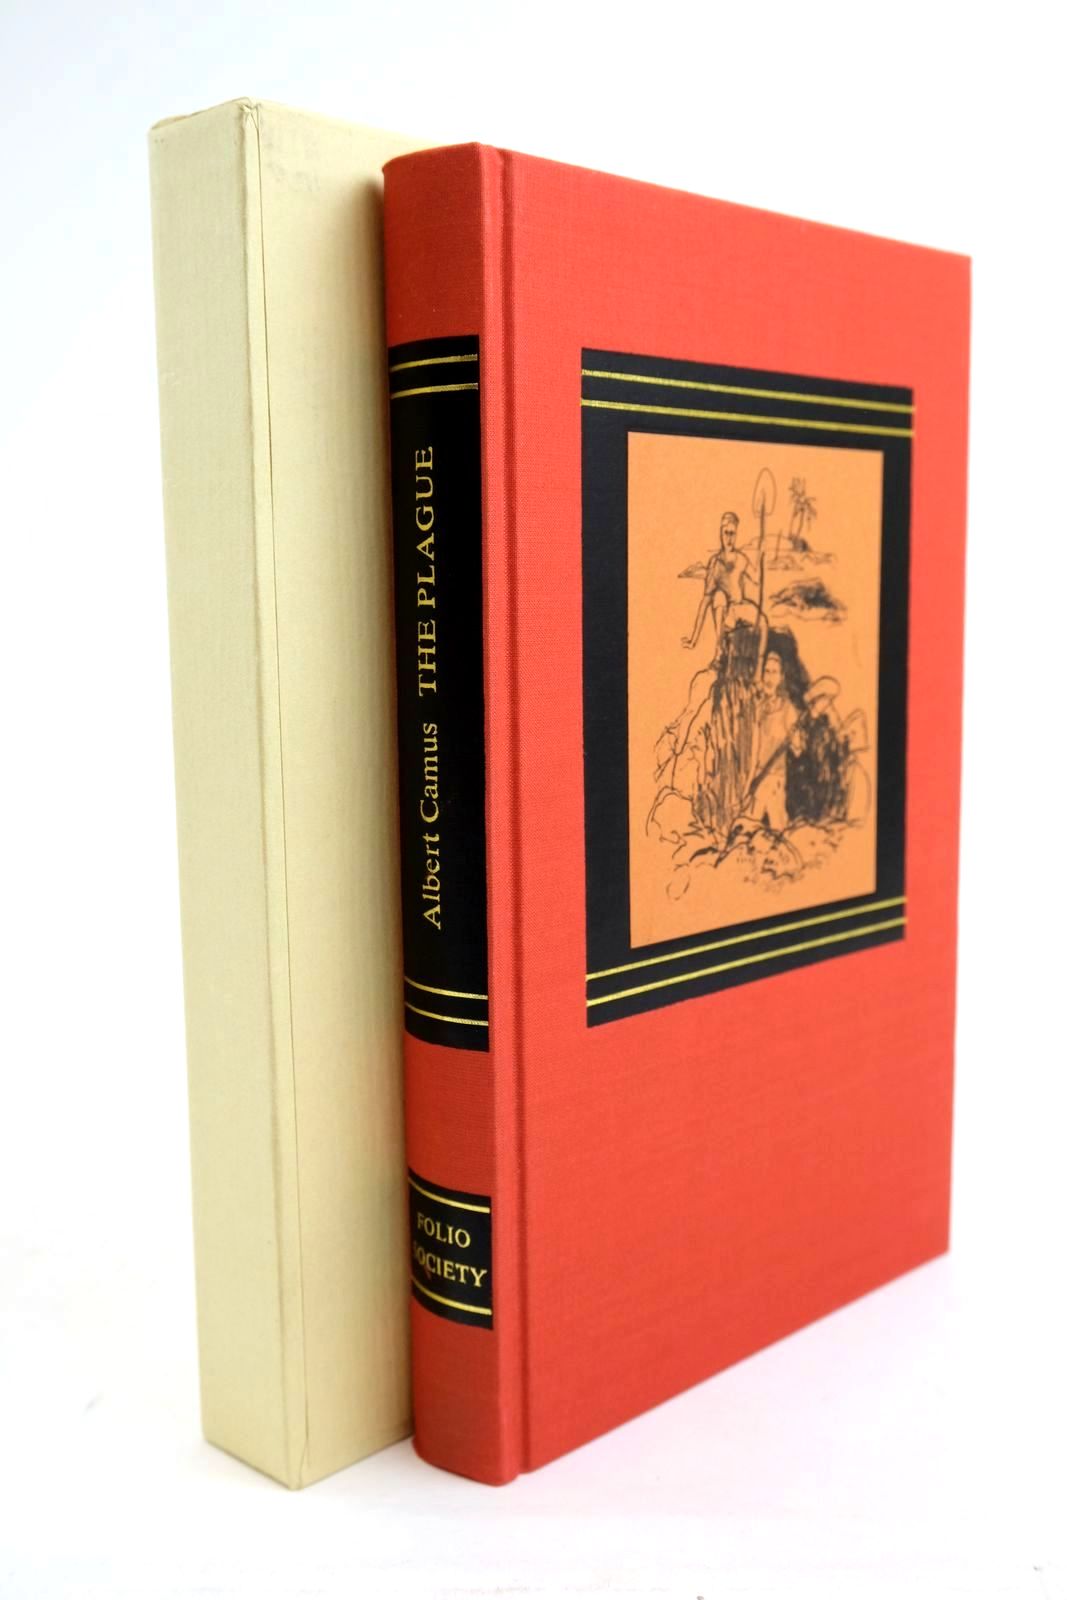 Photo of THE PLAGUE written by Camus, Albert
Parker, Derek illustrated by Kitson, Linda published by Folio Society (STOCK CODE: 1321587)  for sale by Stella & Rose's Books